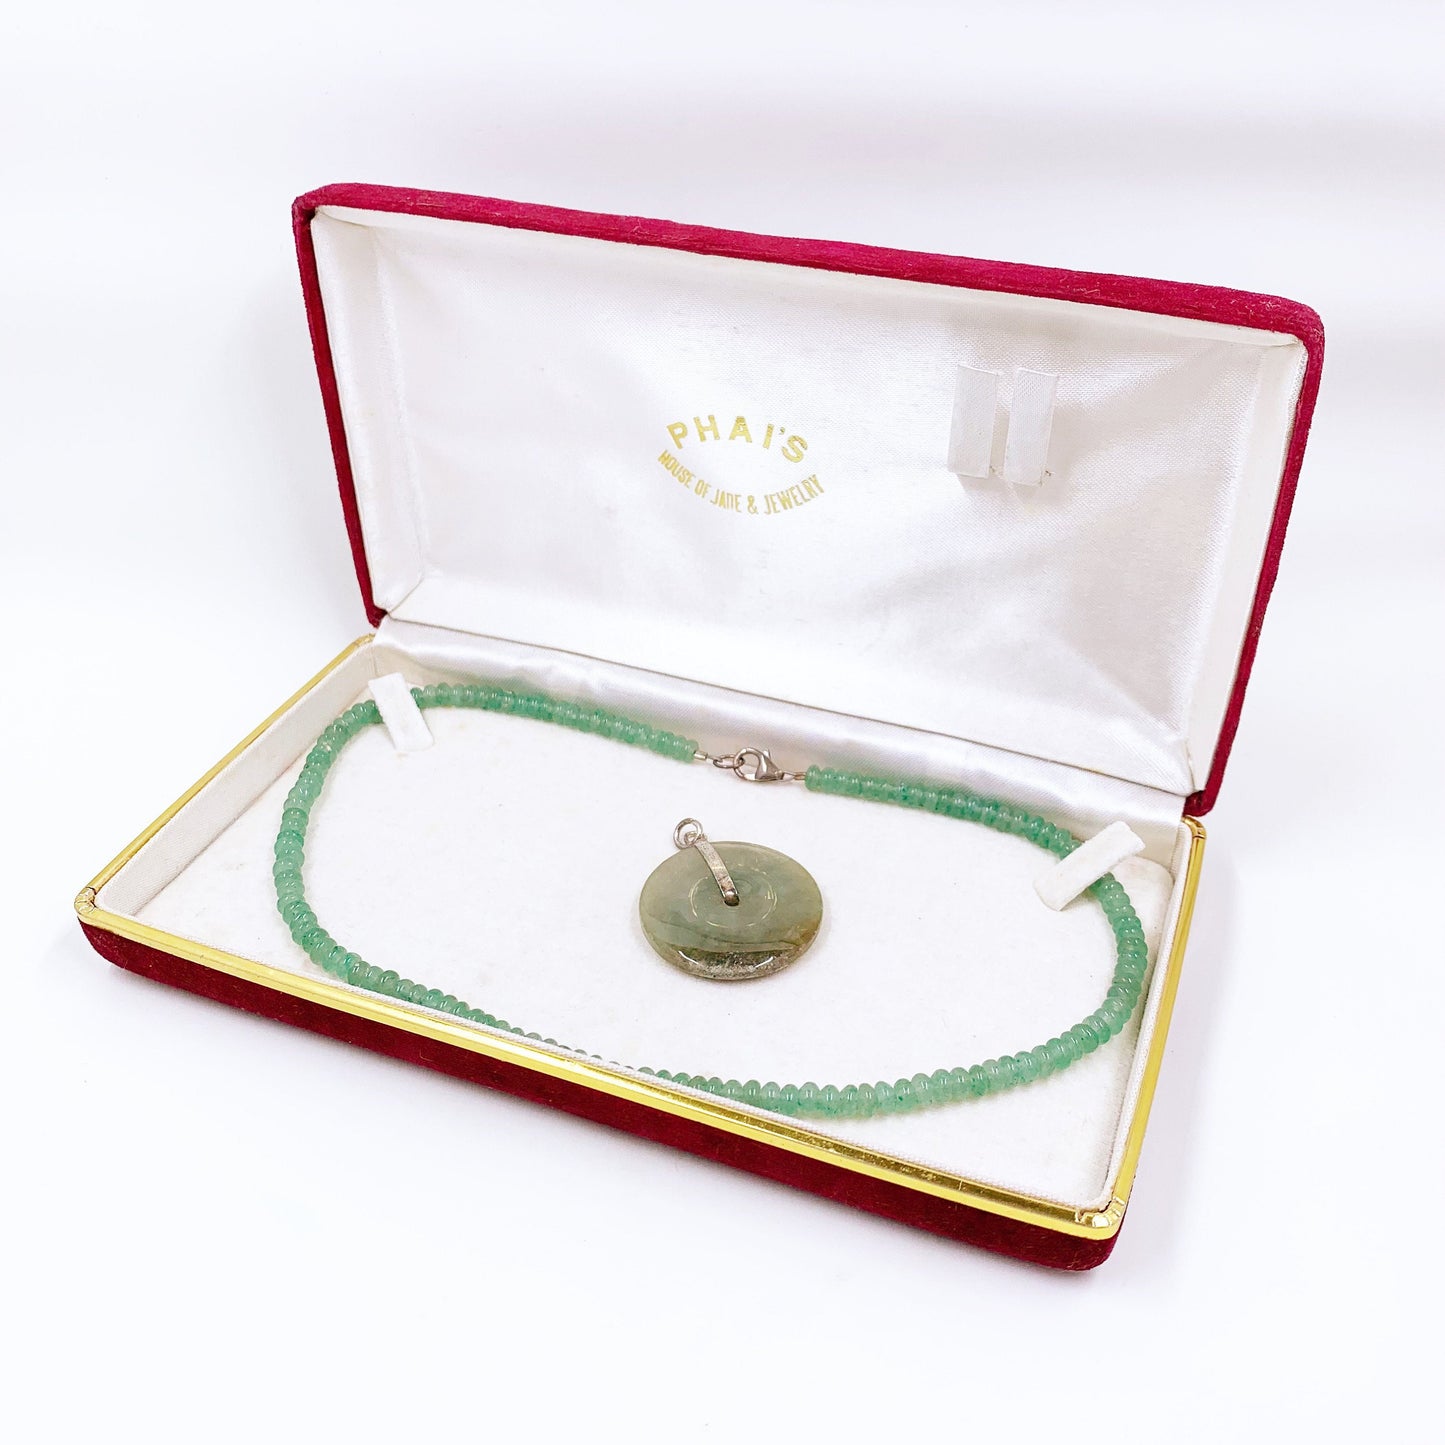 Vintage Necklace Presentation Jewelry Box | Phai's House of Jade and Jewelry Jewelry Gift Box | Jewelry Display | Red and Gold Box